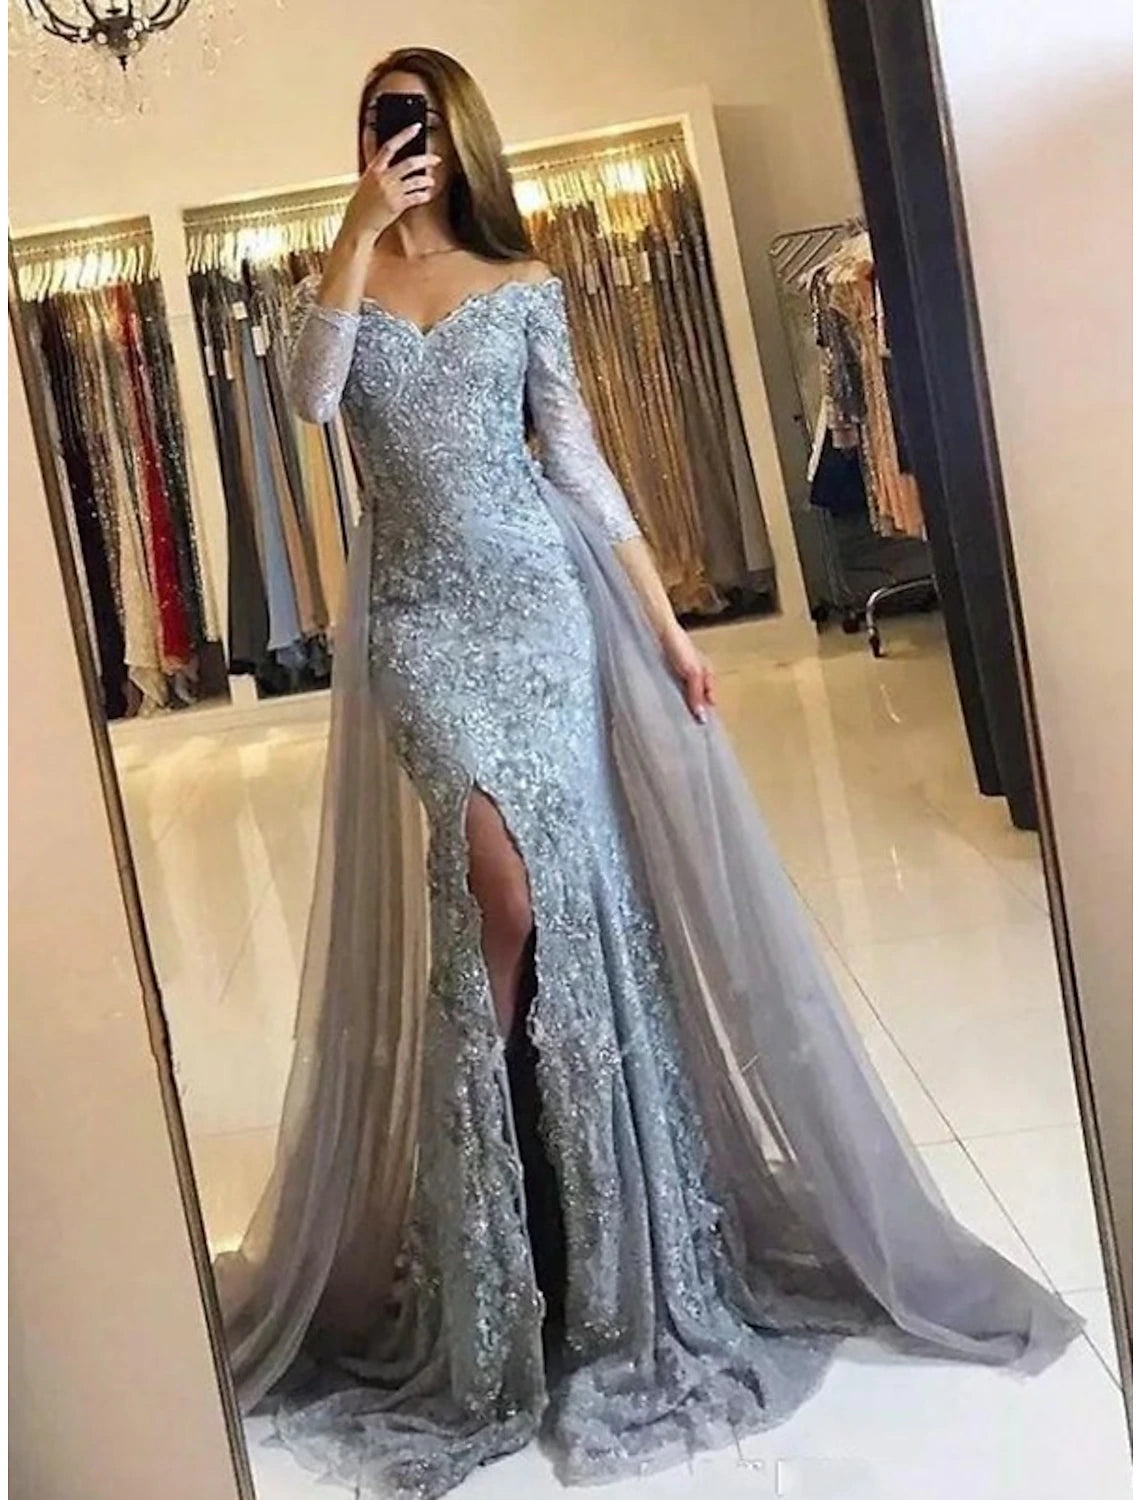 Mermaid / Trumpet Evening Gown Floral Dress Formal Wedding Sweep / Brush Train Long Sleeve Off Shoulder Fall Wedding Reception Chiffon with Slit Appliques